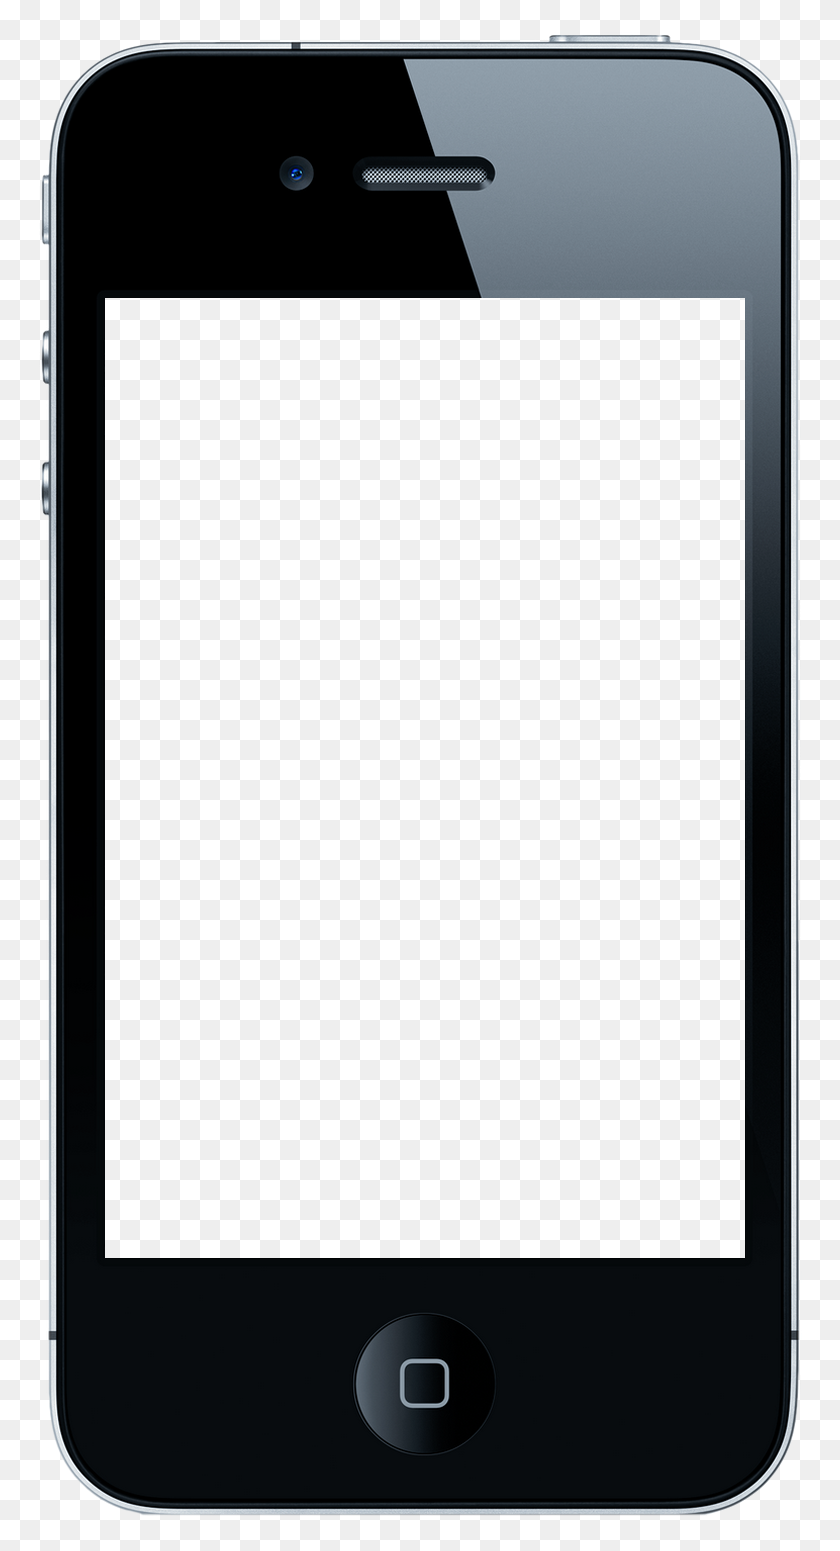 768x1491 Iphone Apple Png Images Free Download - Blank PNG Image